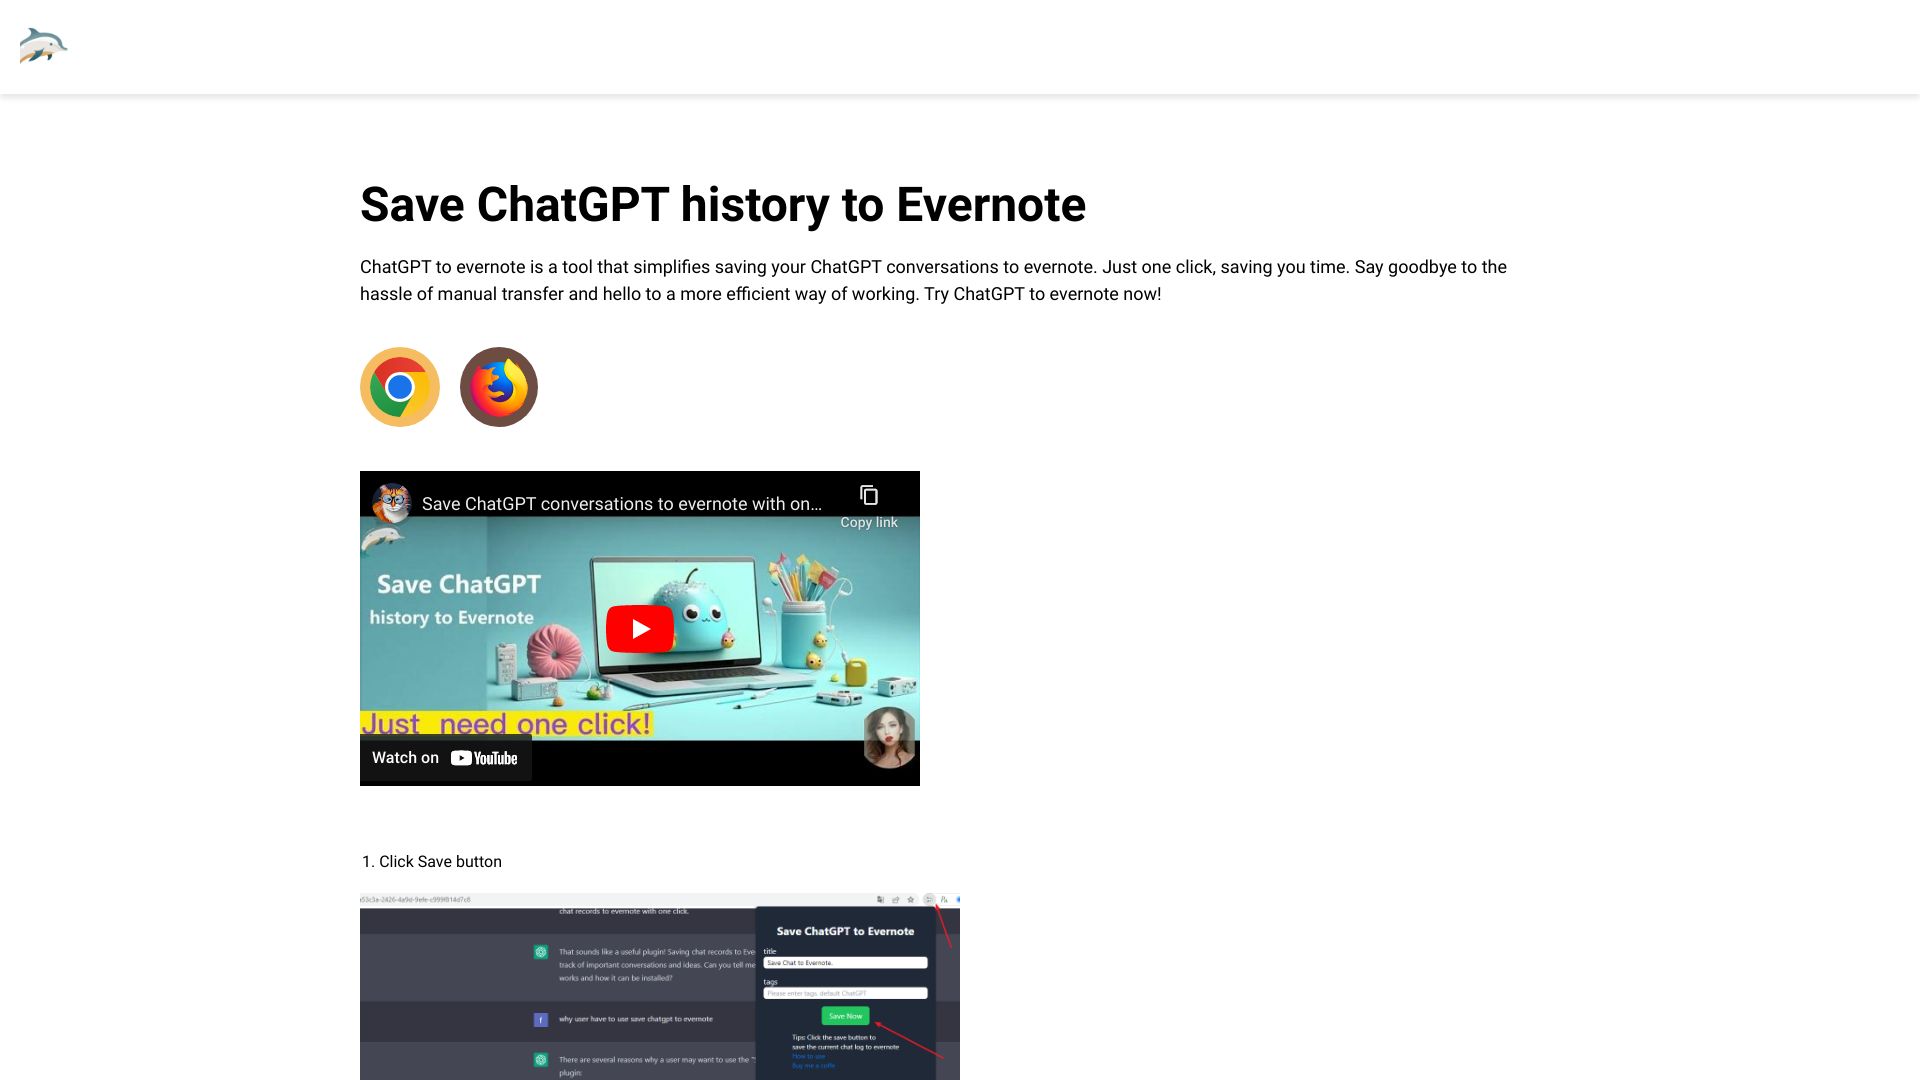 Save ChatGPT history to Evernote